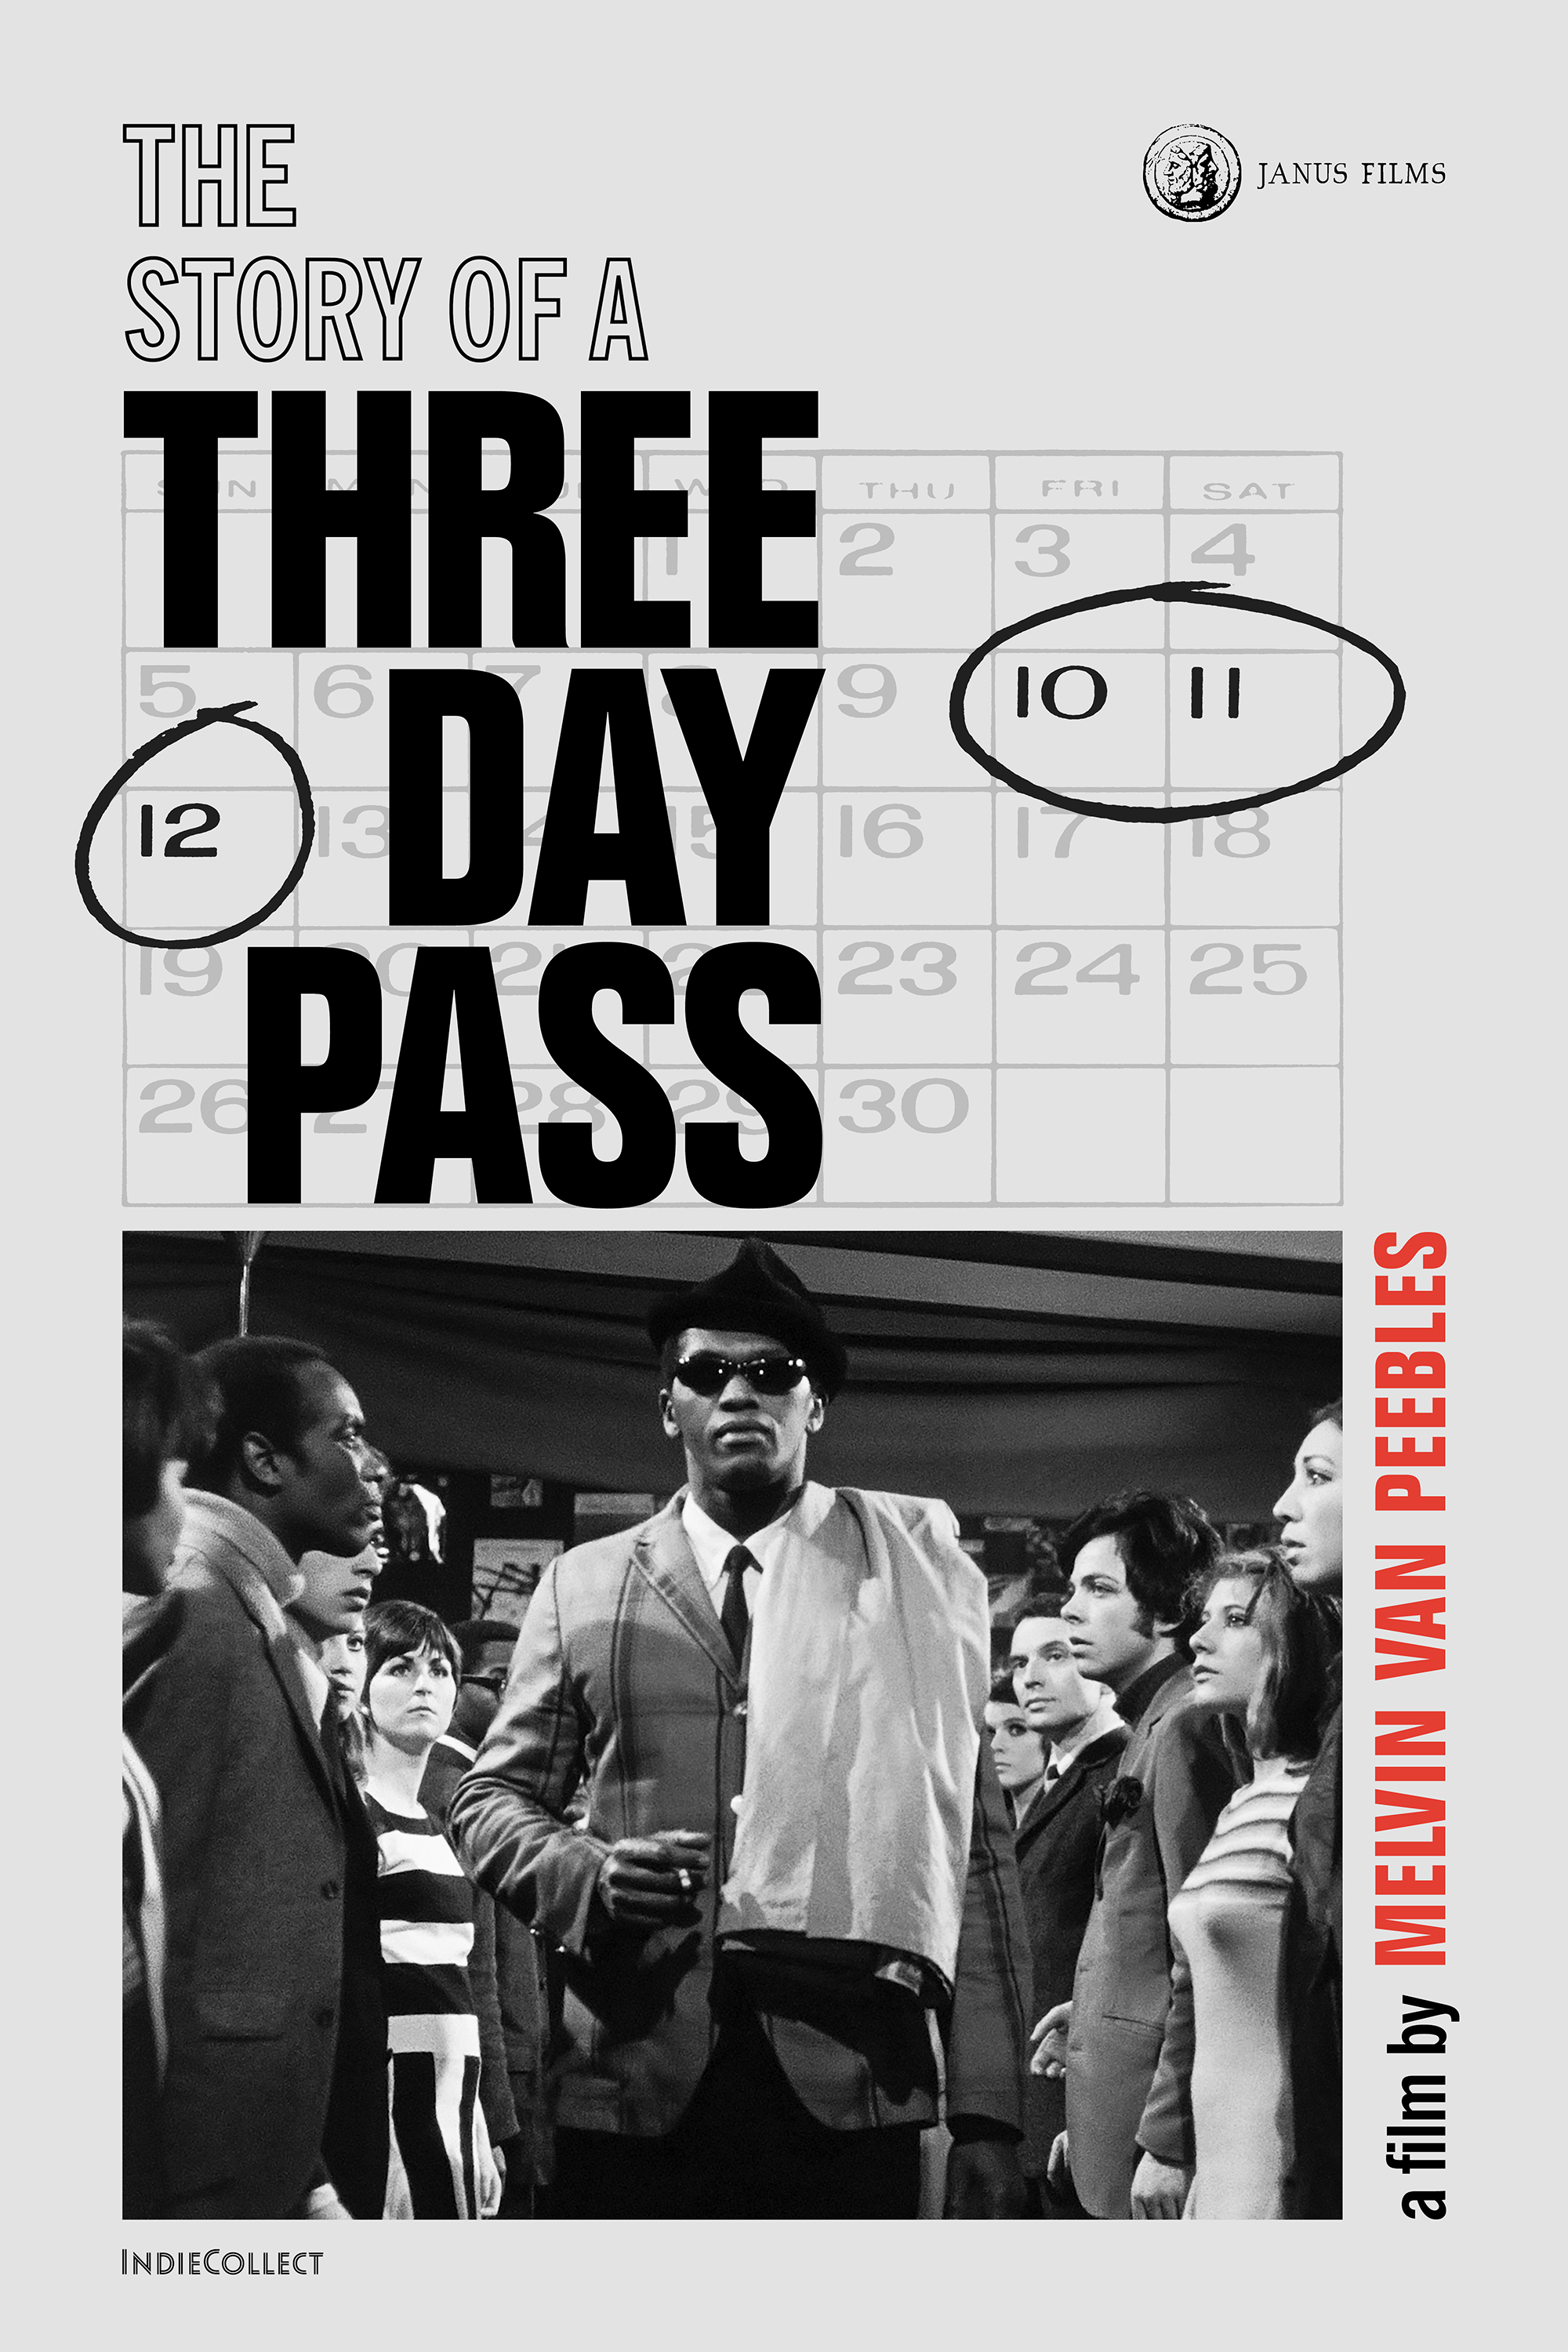 The Story of a Three Day Pass